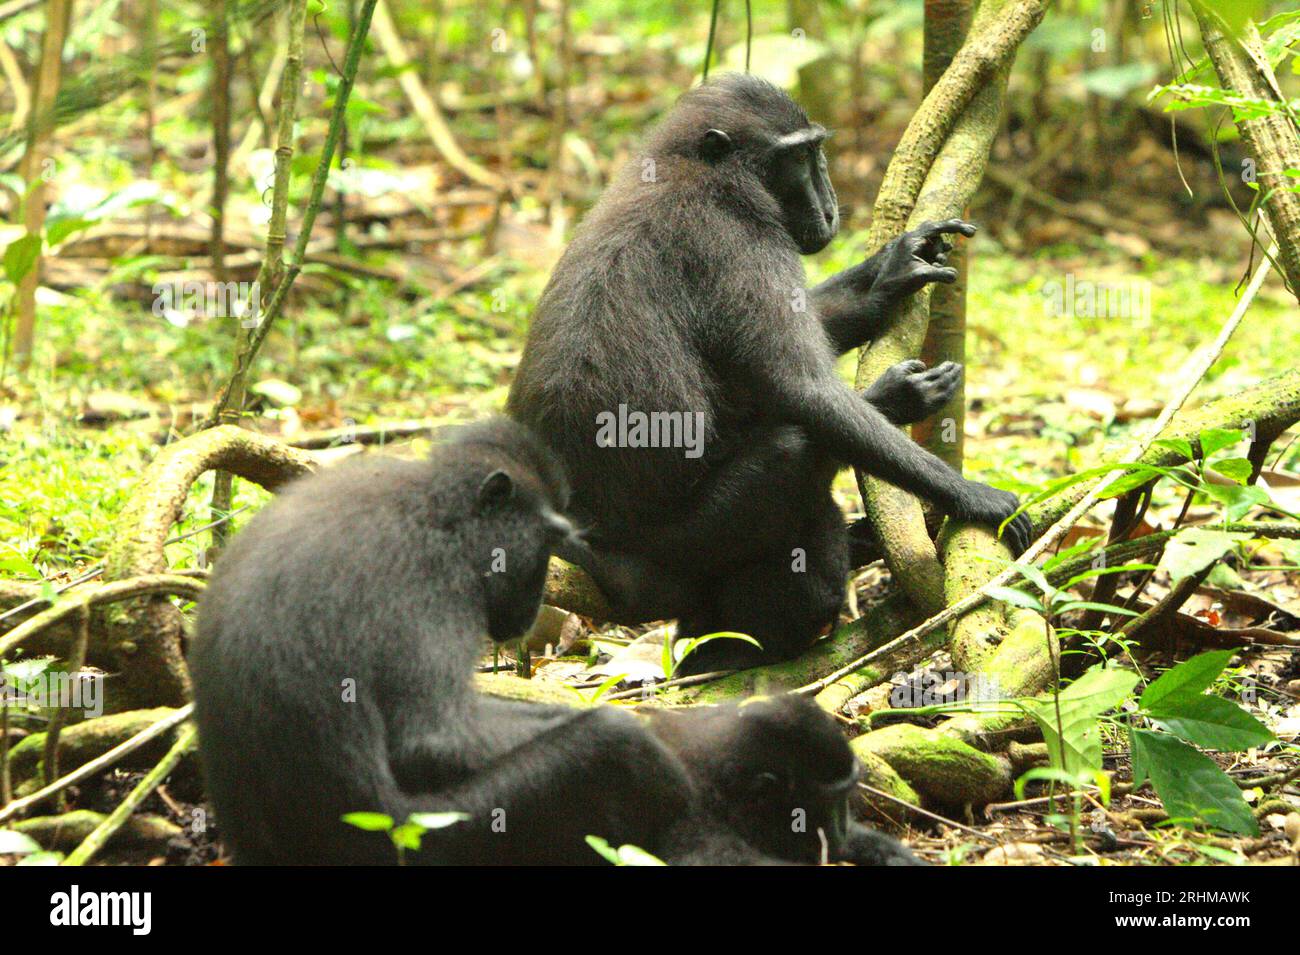 Crested macaques (Macaca nigra) in Tangkoko forest, North Sulawesi, Indonesia. A report by a team of scientists led by Marine Joly revealed that temperature is increasing in Tangkoko forest, and the overall fruit abundance decreased. 'Between 2012 and 2020, temperatures increased by up to 0.2 degree Celsius per year in the forest, and the overall fruit abundance decreased by 1 percent per year,” they wrote on International Journal of Primatology in July 2023. 'In a warmer future, they (primates) would have to adjust, resting and staying in the shade during the hottest times of the day. Stock Photo